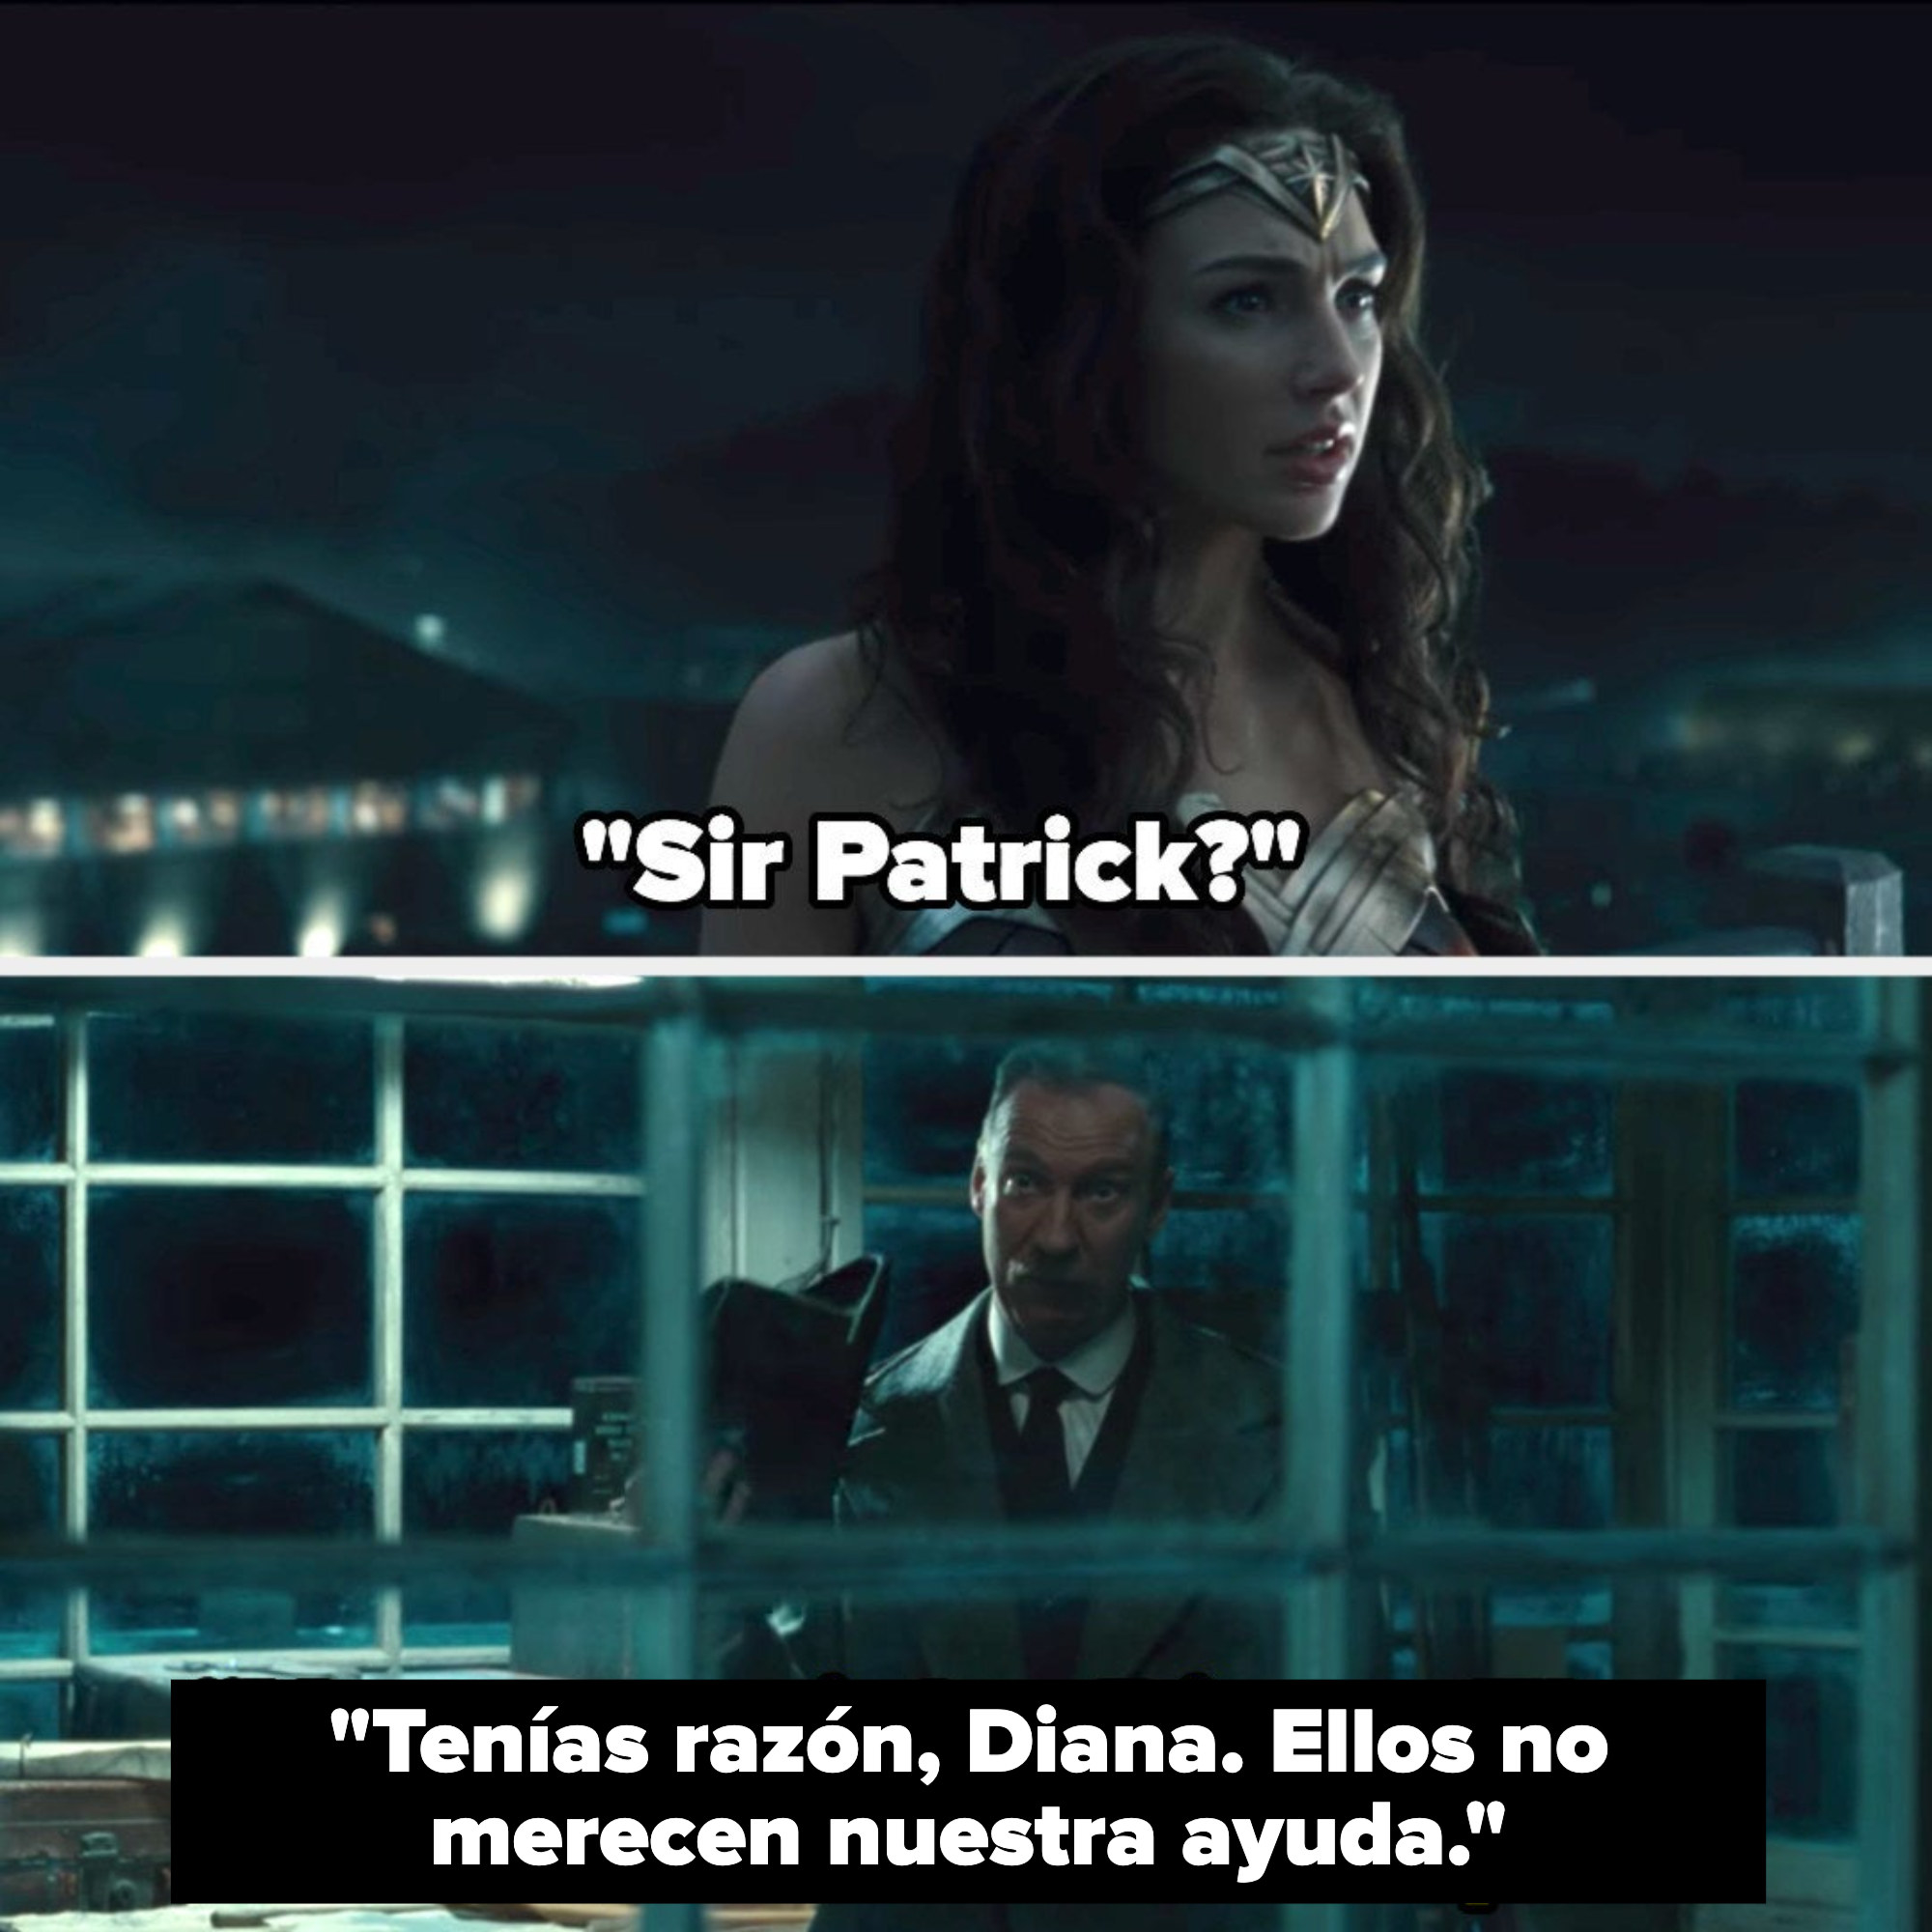 Diana says &quot;Sir Patrick?&quot; and he says, &quot;You were right, Diana. They don&#x27;t deserve our help&quot;